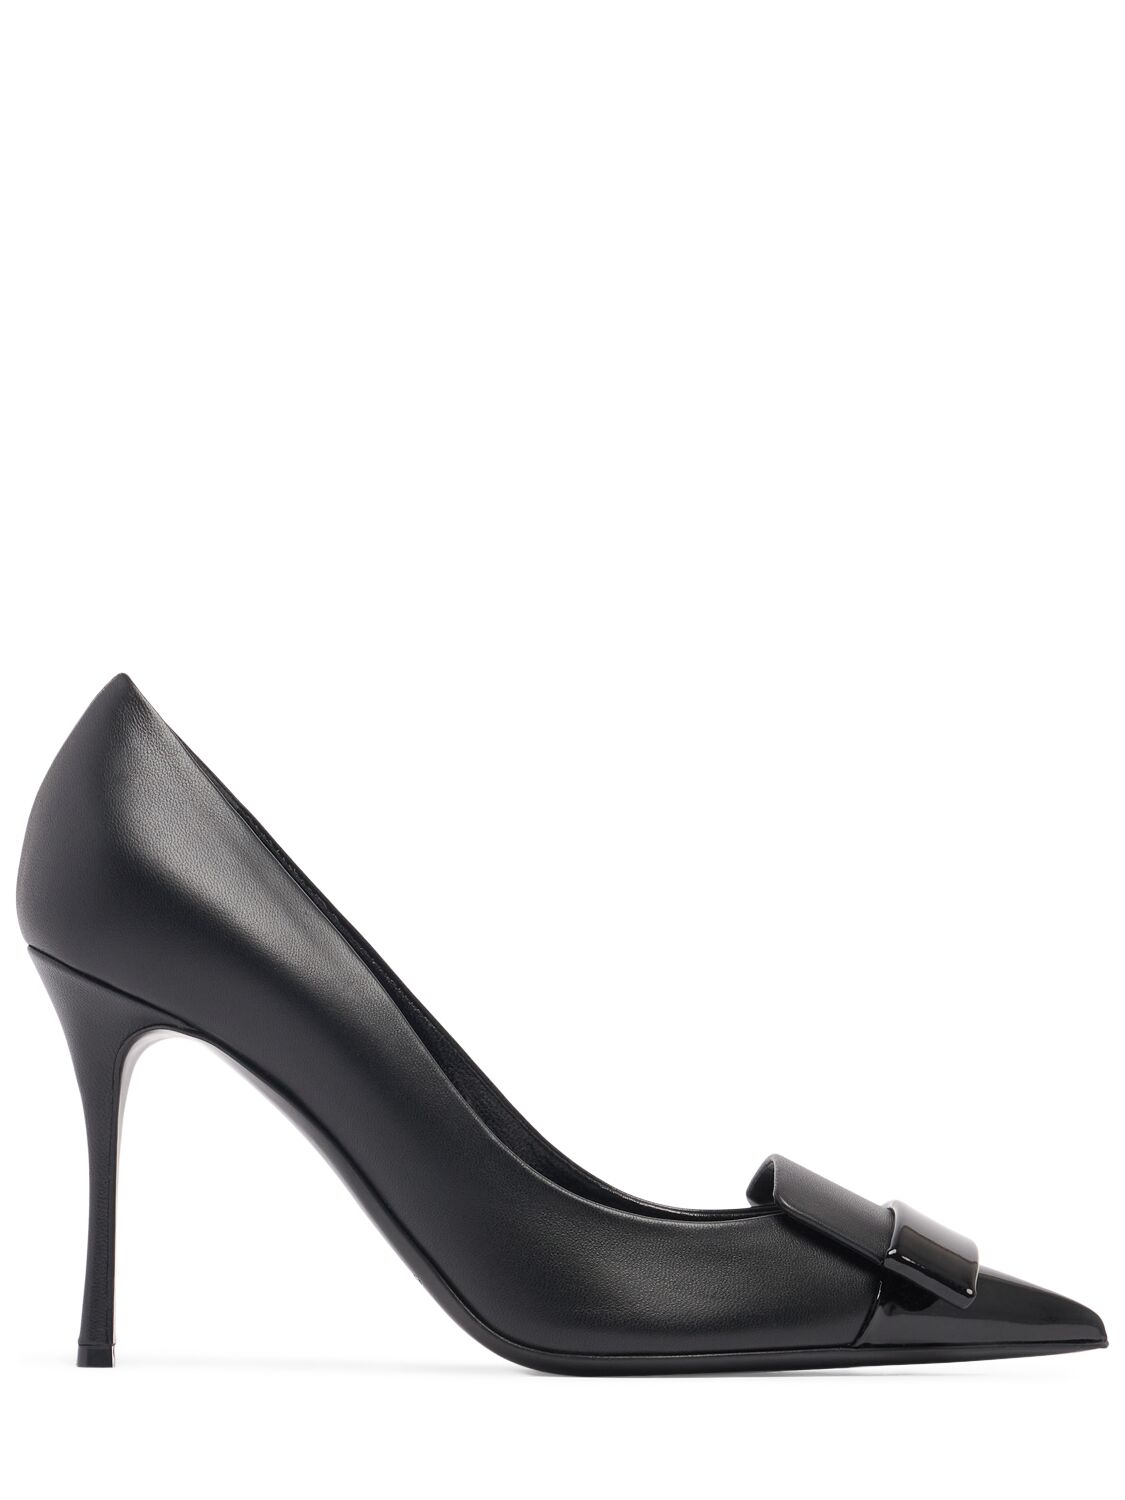 Sergio Rossi 90mm Leather Pumps In Black